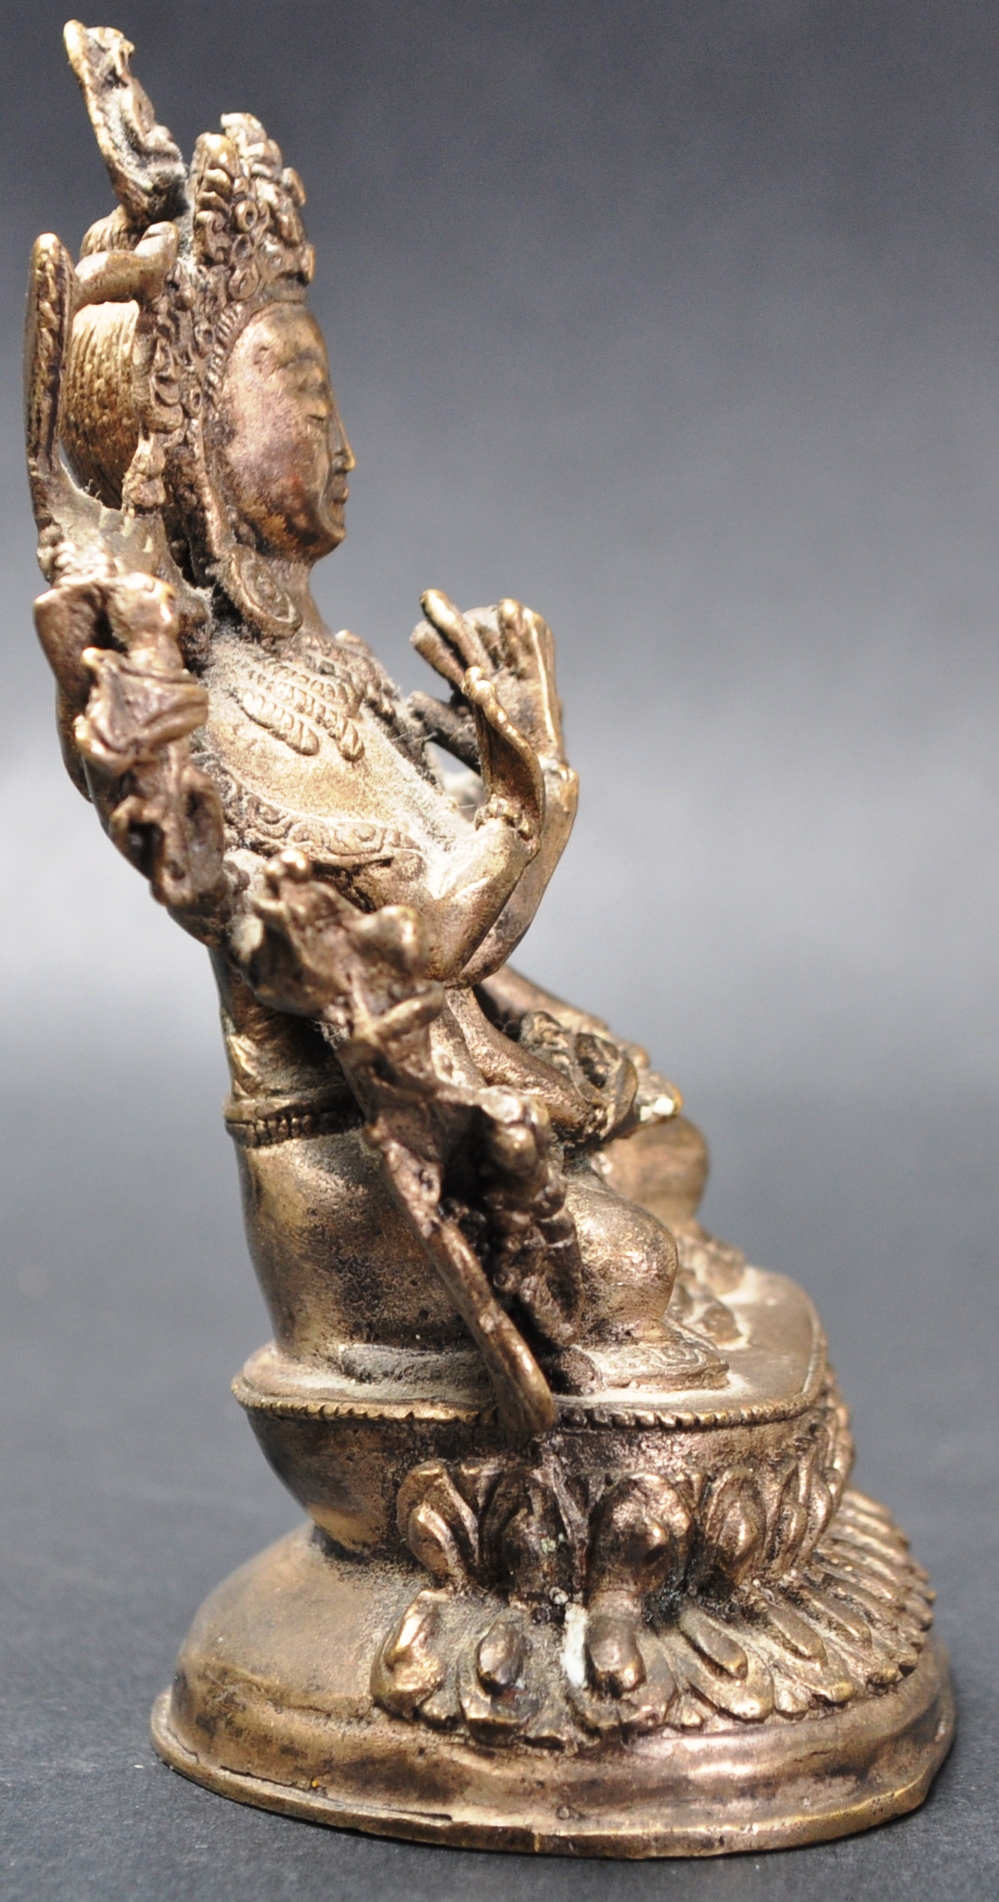 EARLY 20TH CENTURY INDIAN HINDU WHITE METAL GOD STATUE - Image 4 of 6